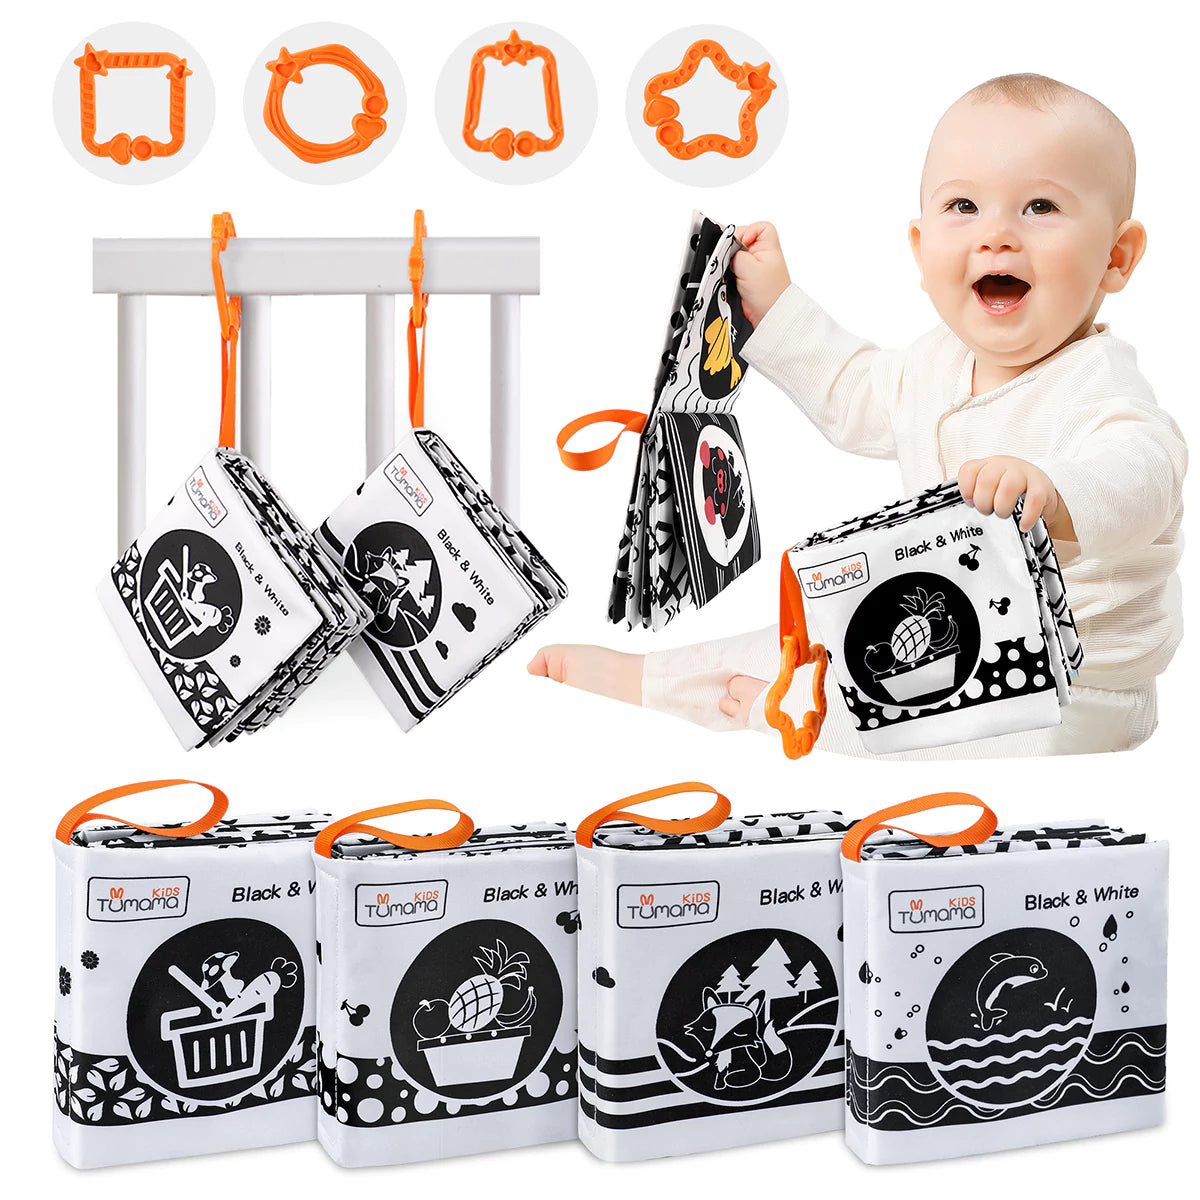 Baby book, my first crinkle books soft cloth toys, black and white activity busy books, animals, fruit, vegetable learning toy set for baby toddler 3 Month+